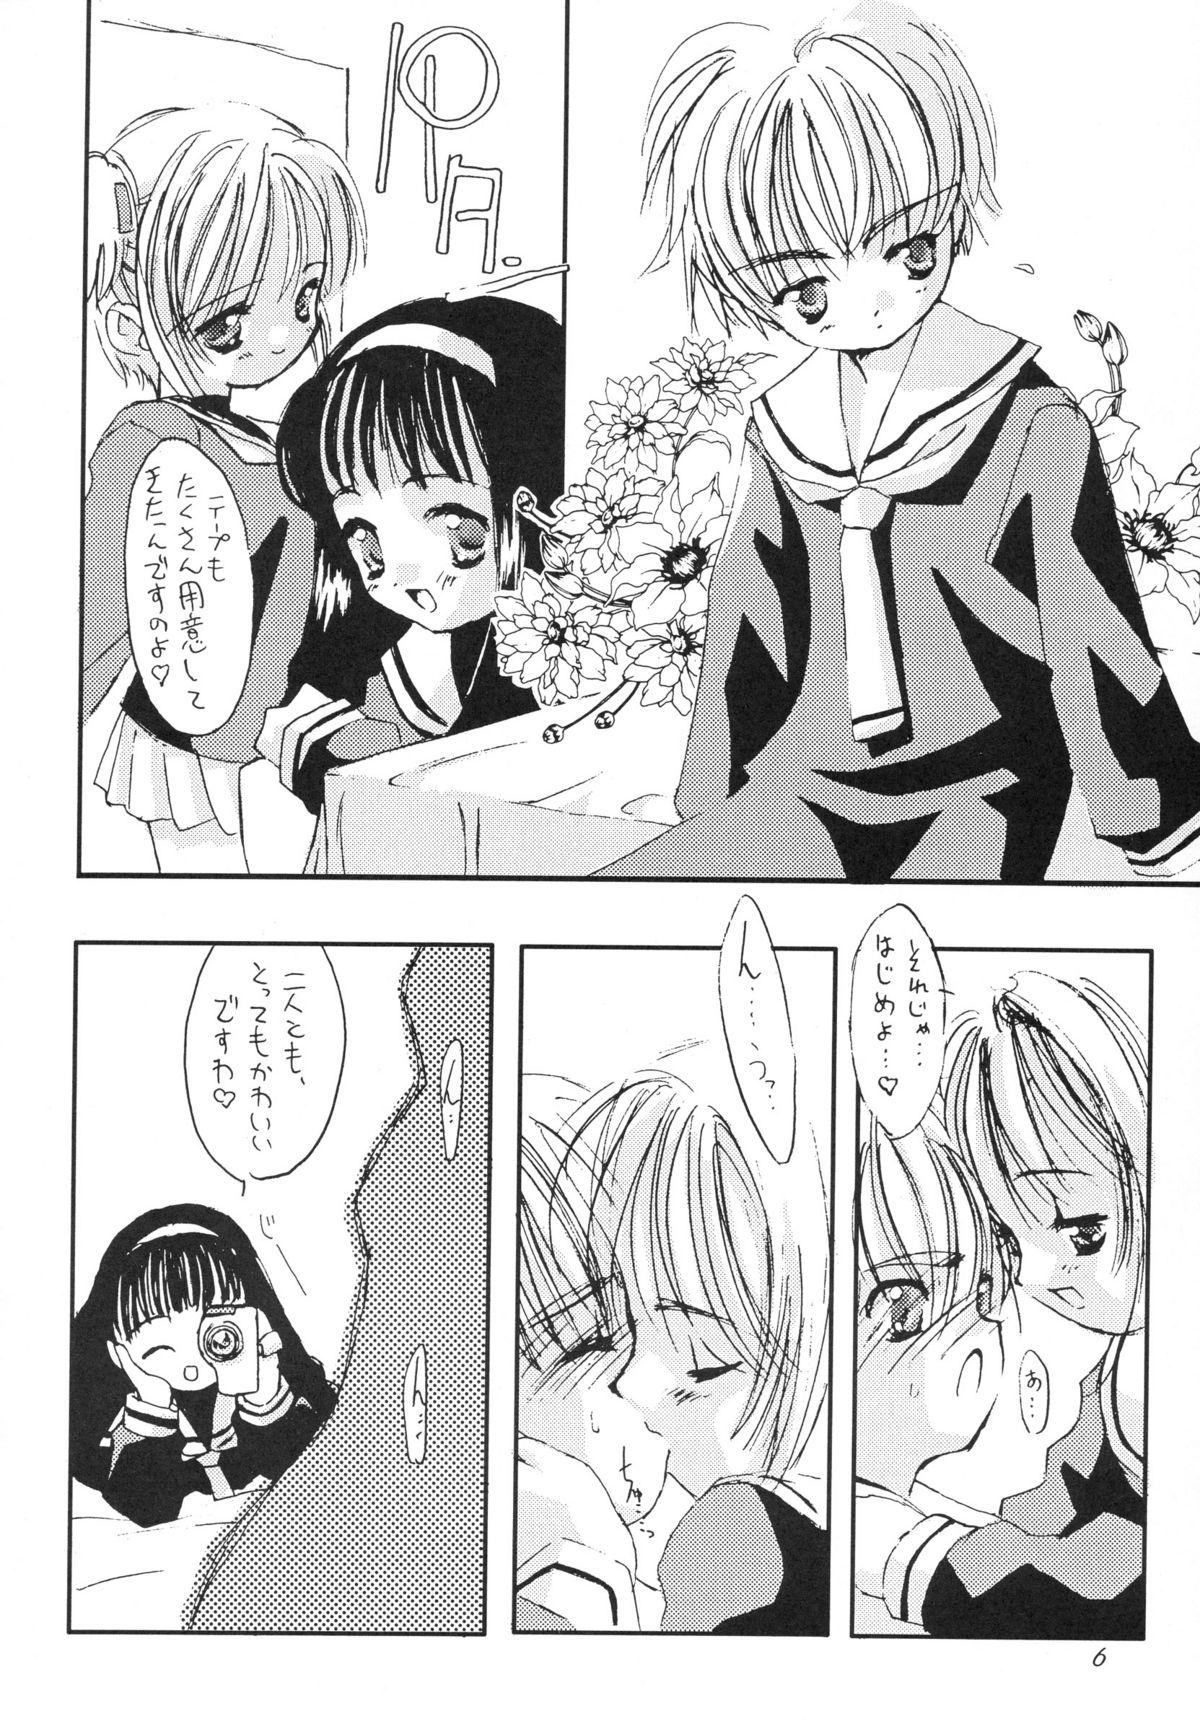 Old Young Please Teach Me 2. - Cardcaptor sakura Twinks - Page 7